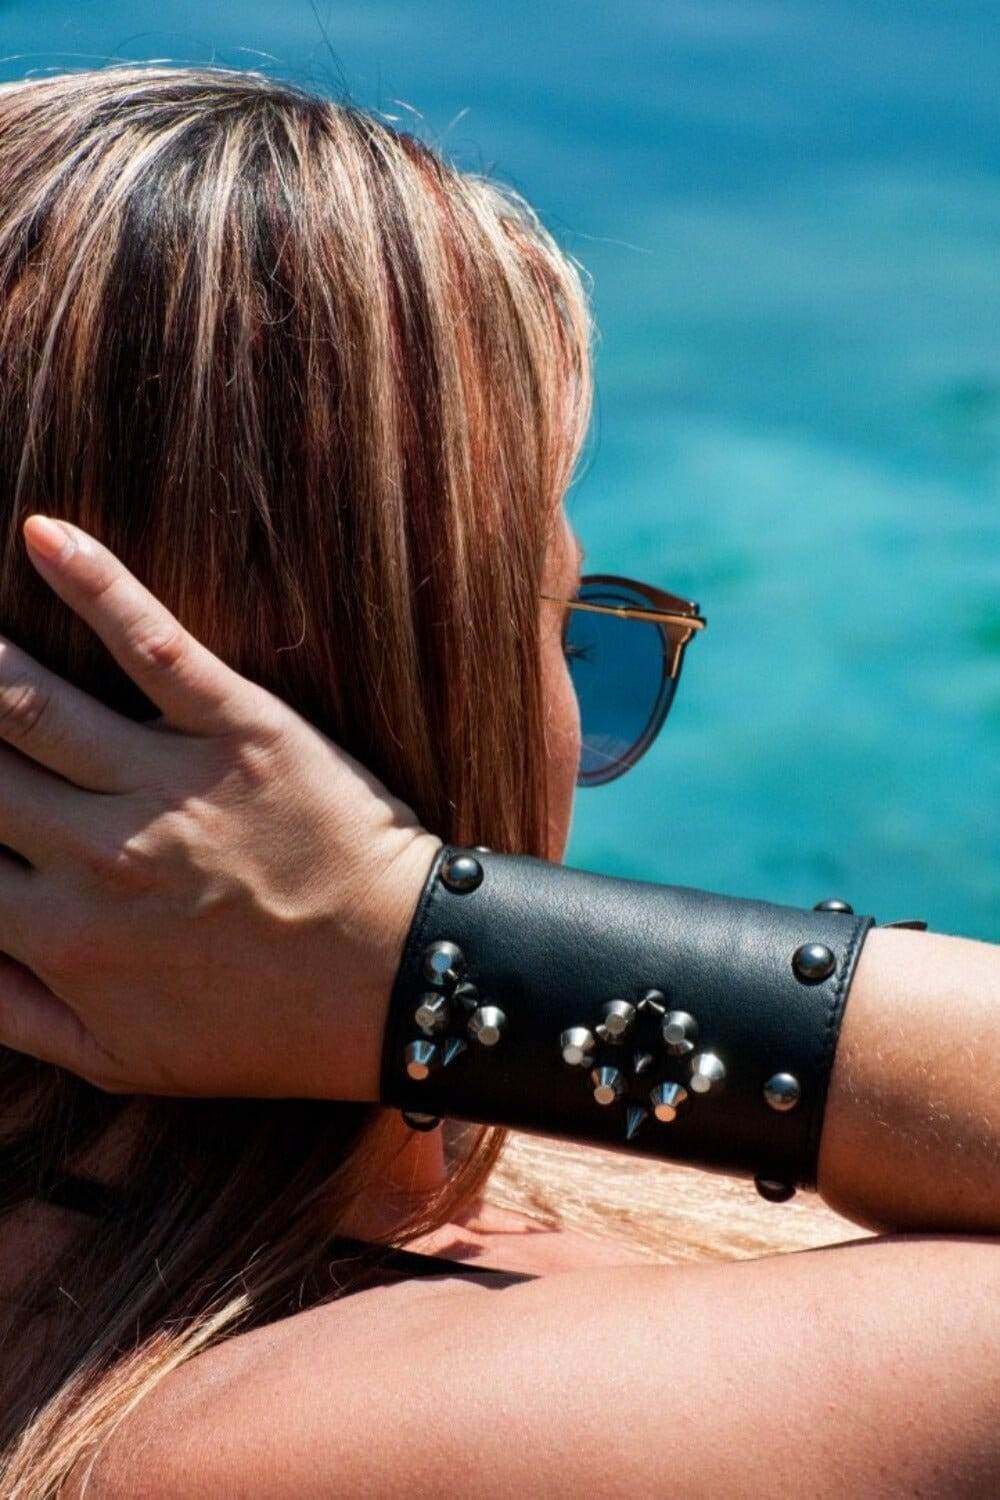 Studded Leather Cuff Bracelet, cybergoth leather cuff accessory with hidden pocket inside by Love Khaos